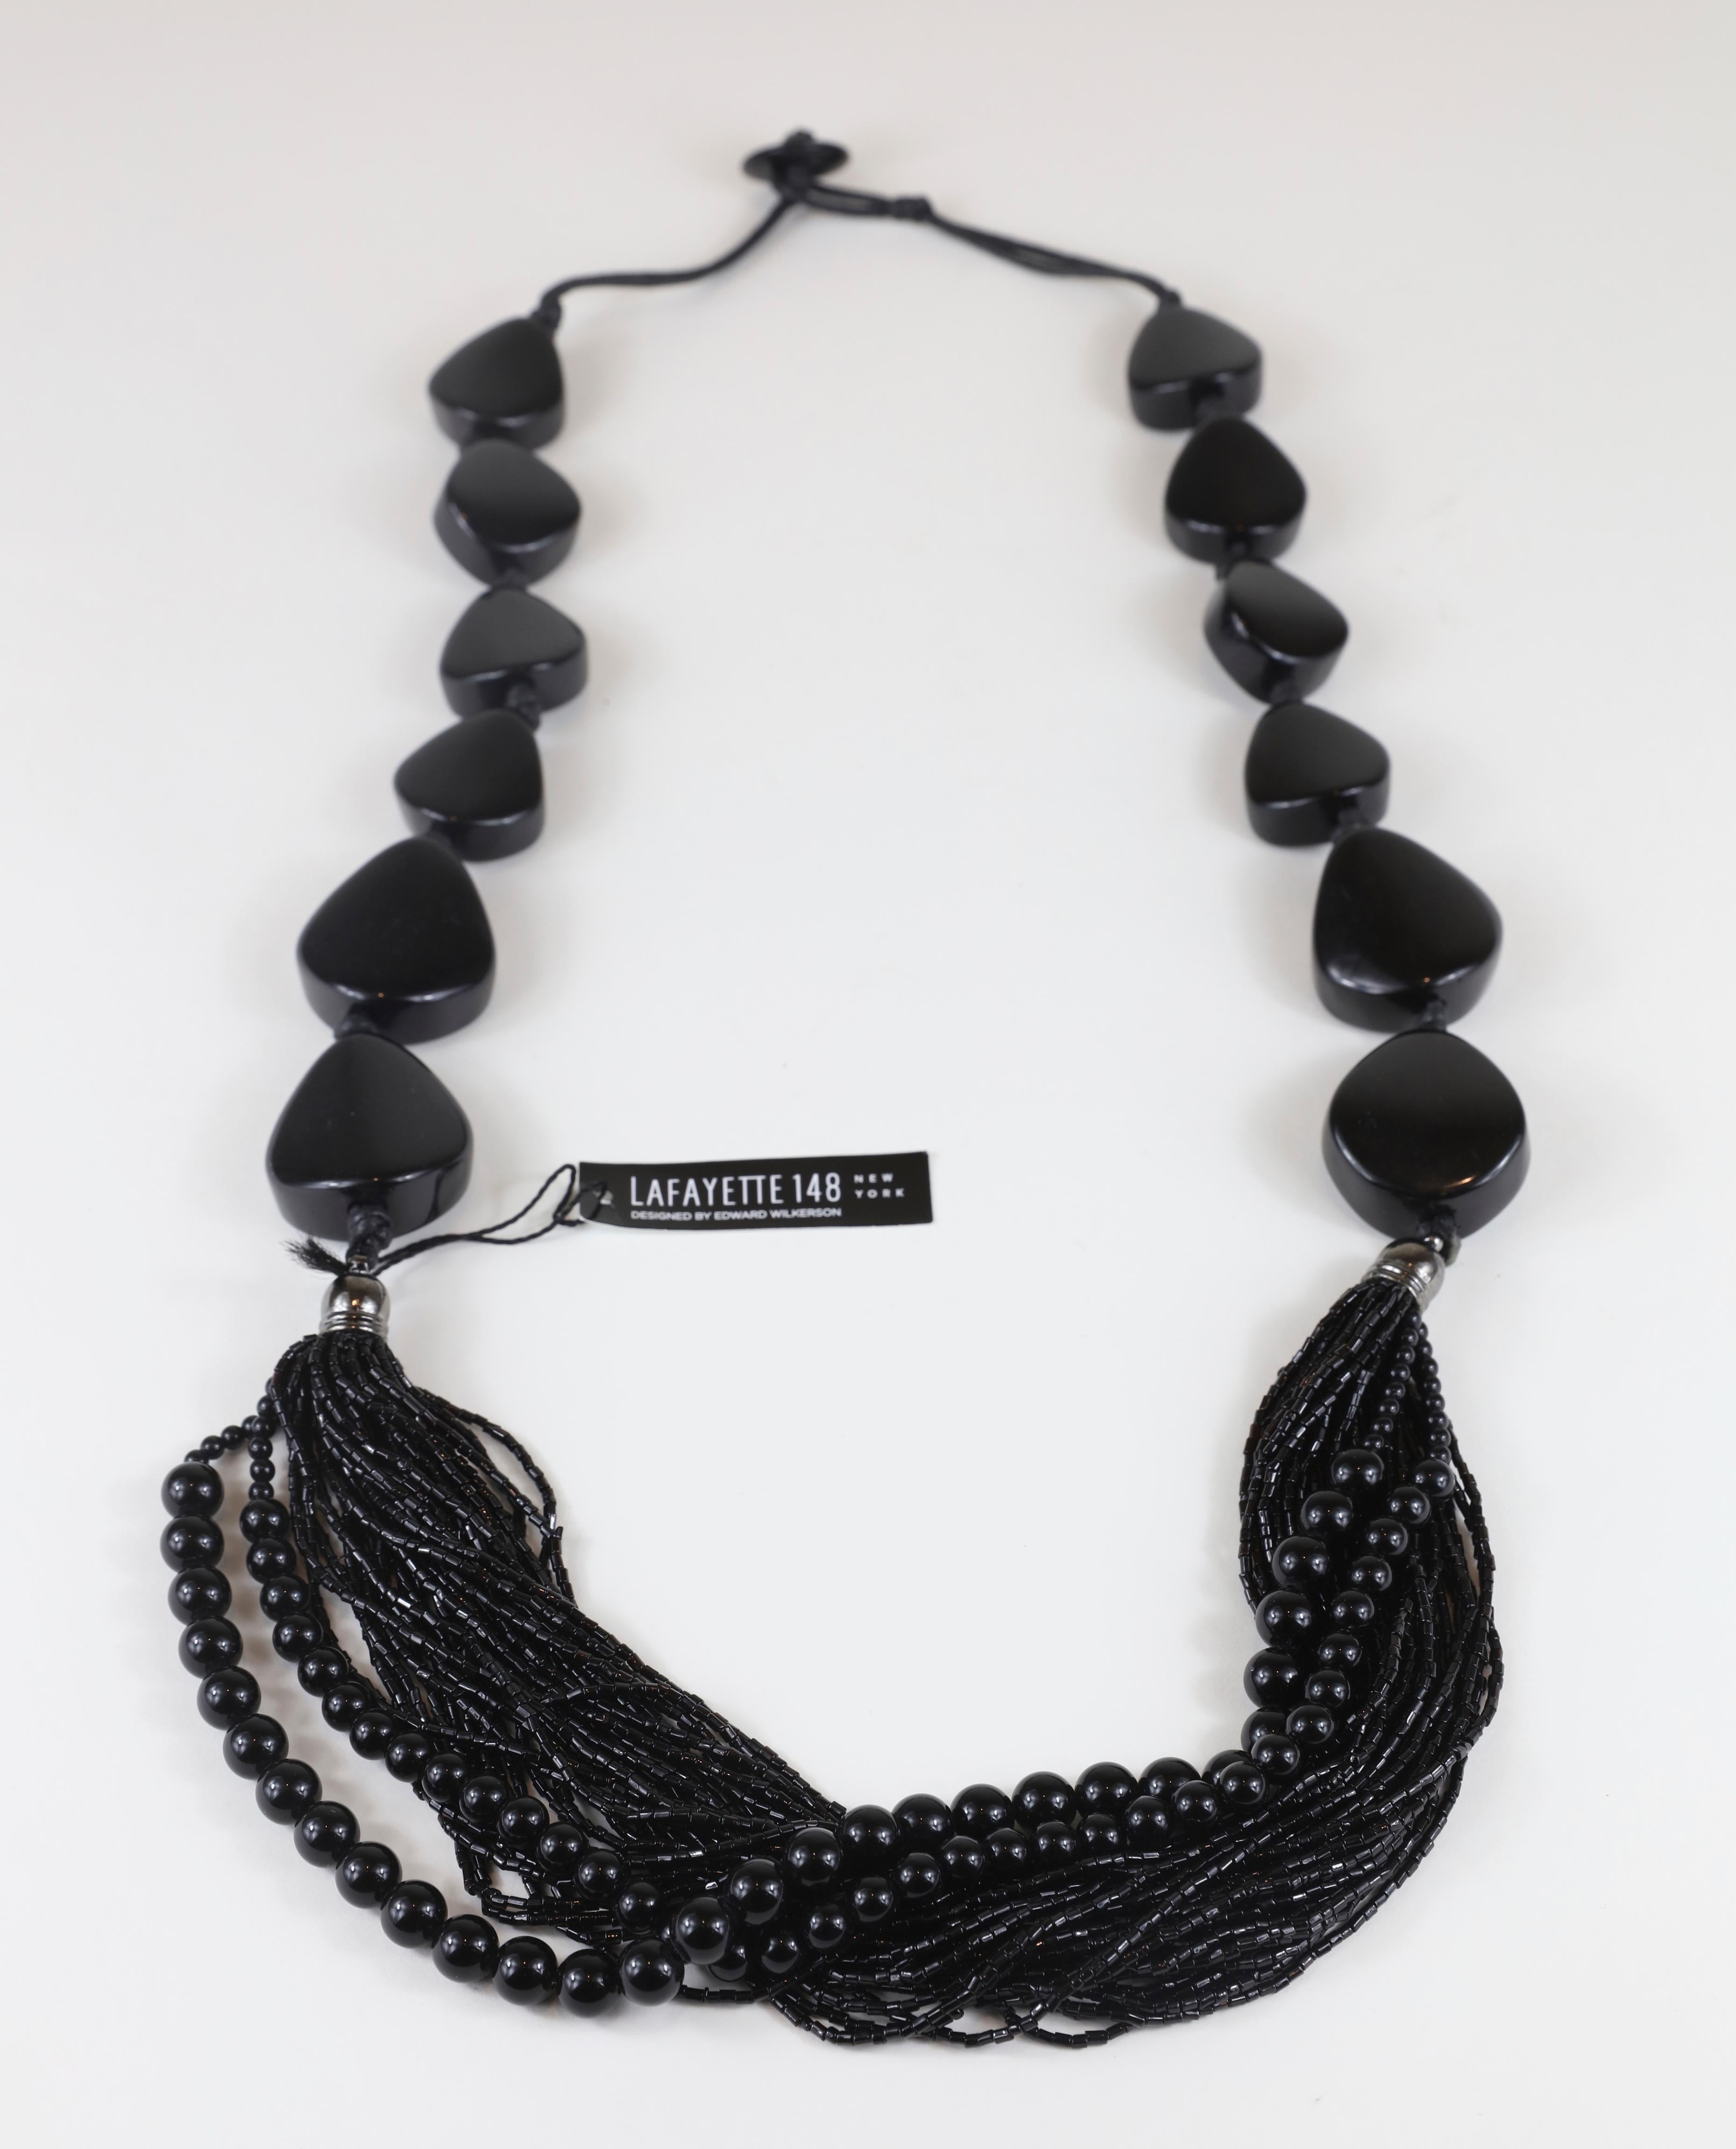 New with tags, black beaded statement necklace. The exact year of manufacture is unknown.